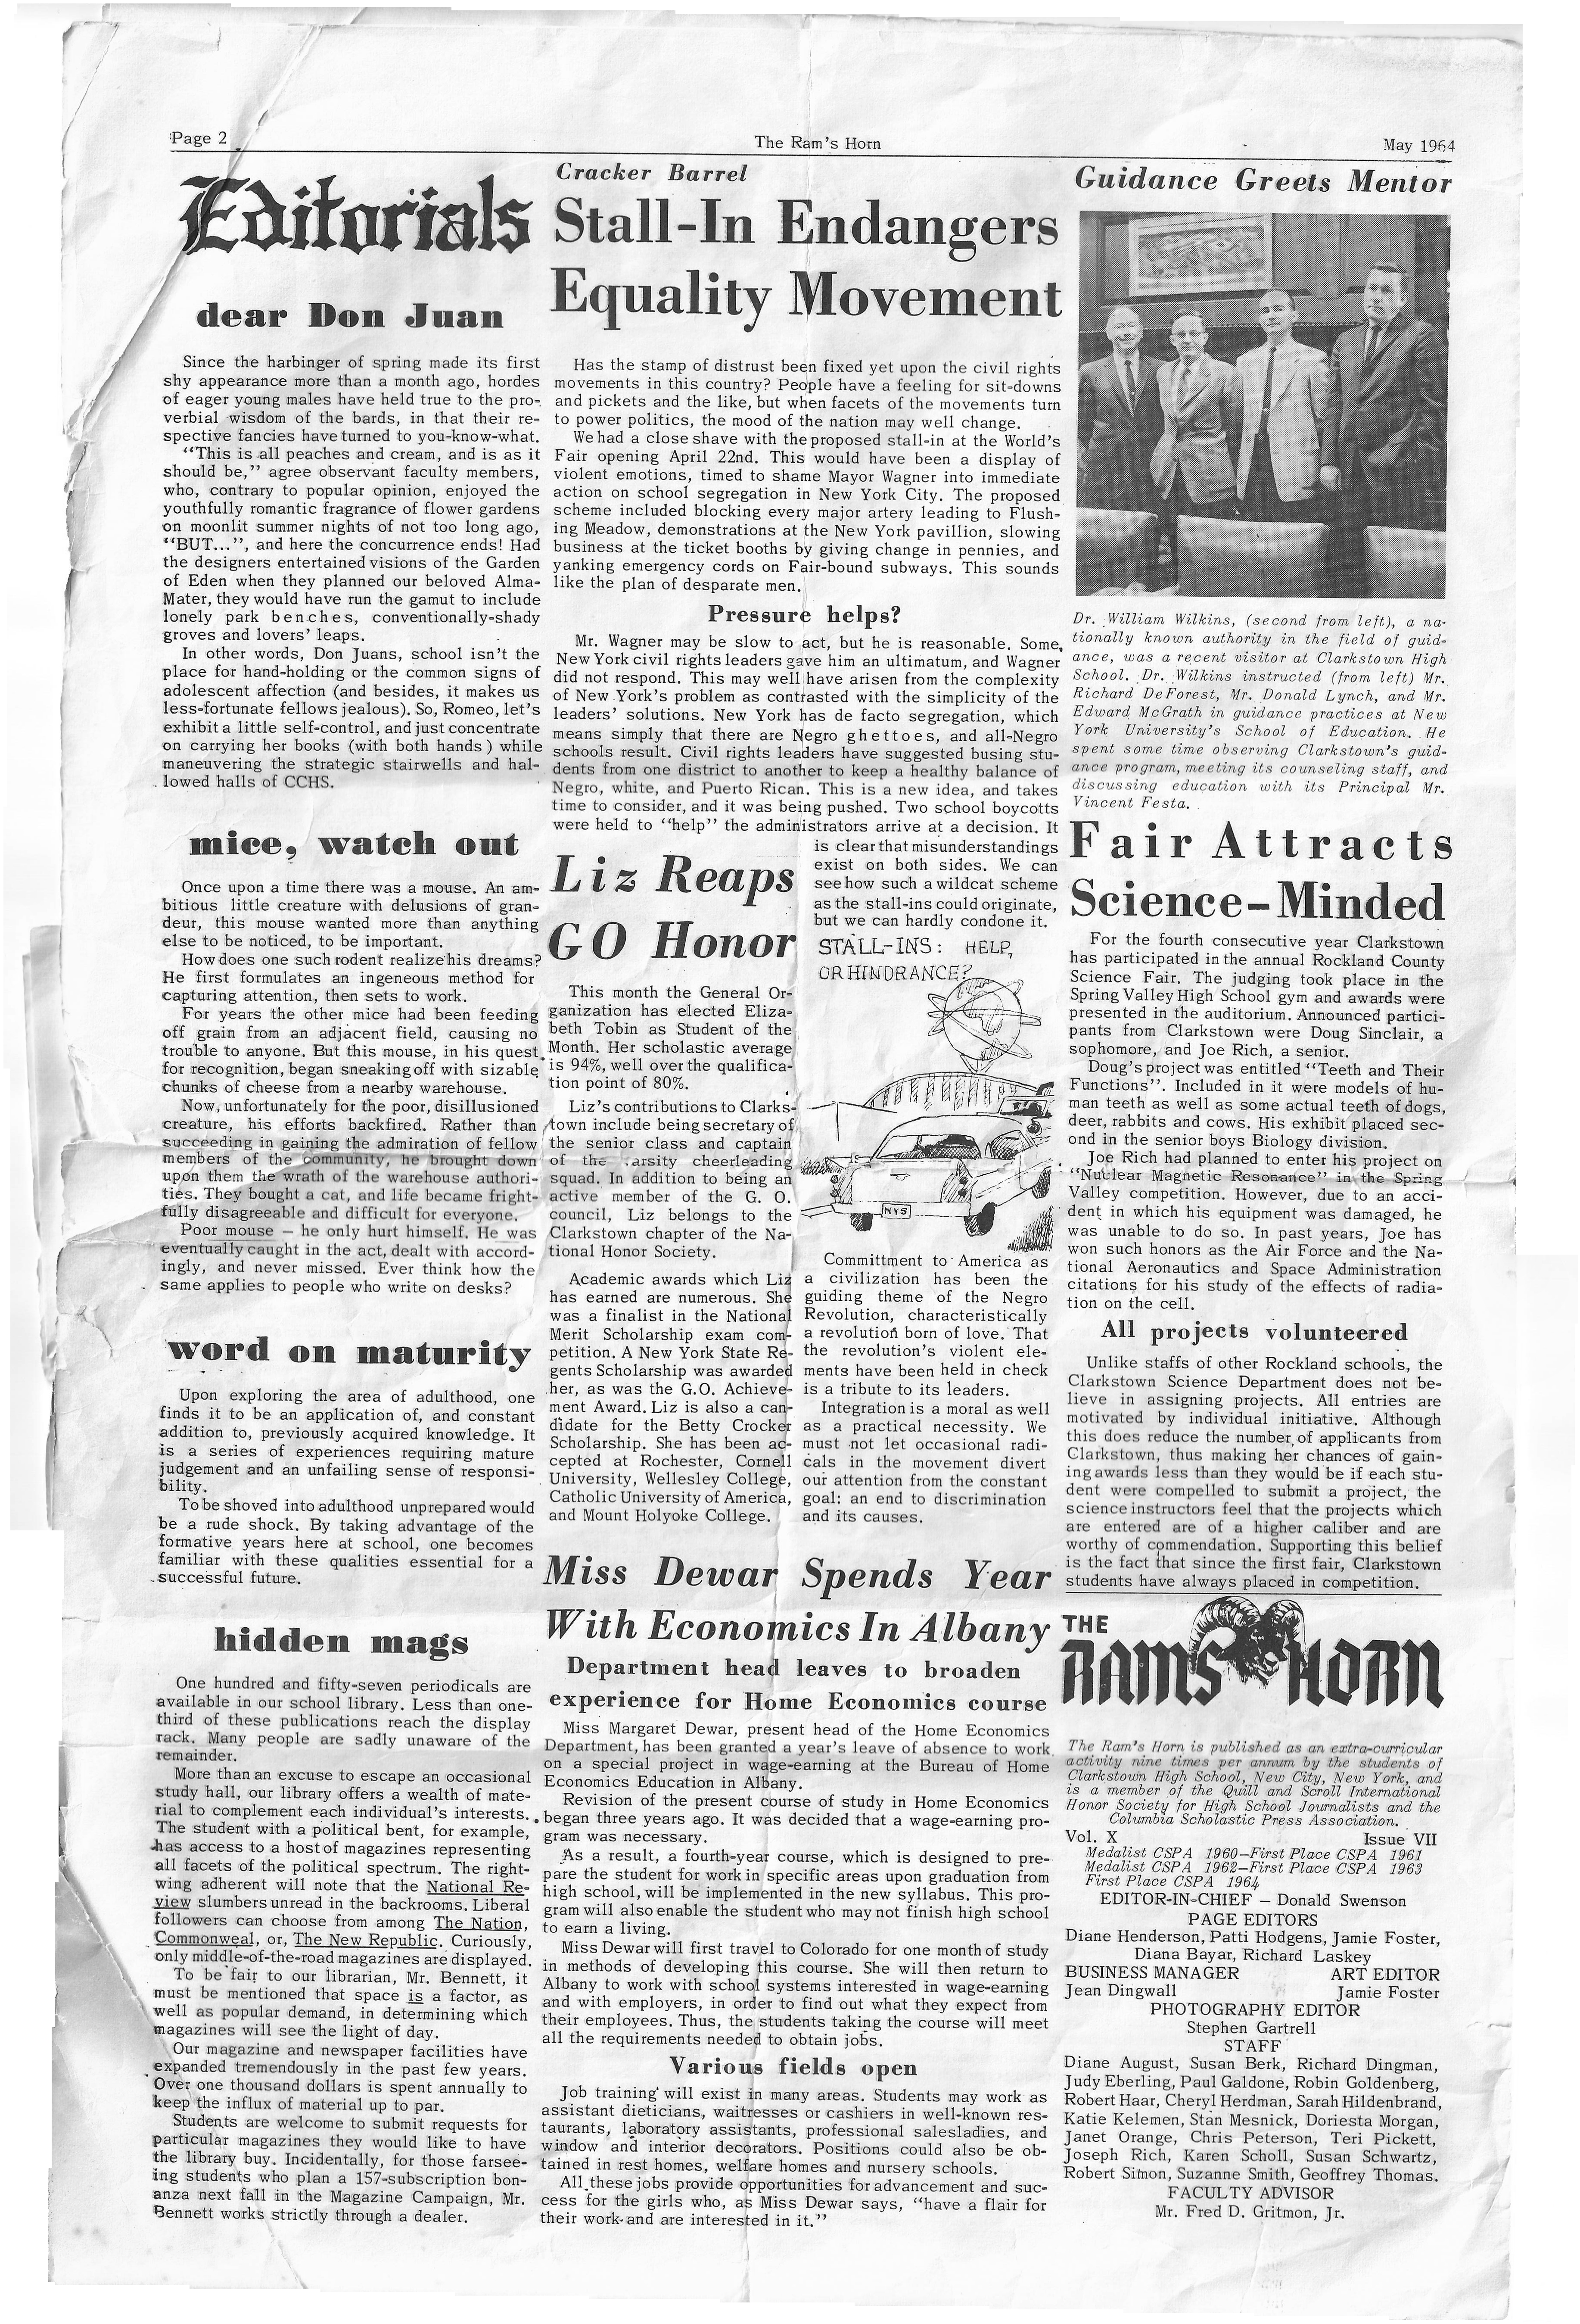 The Ram's Horn - May. '64 - Page 2